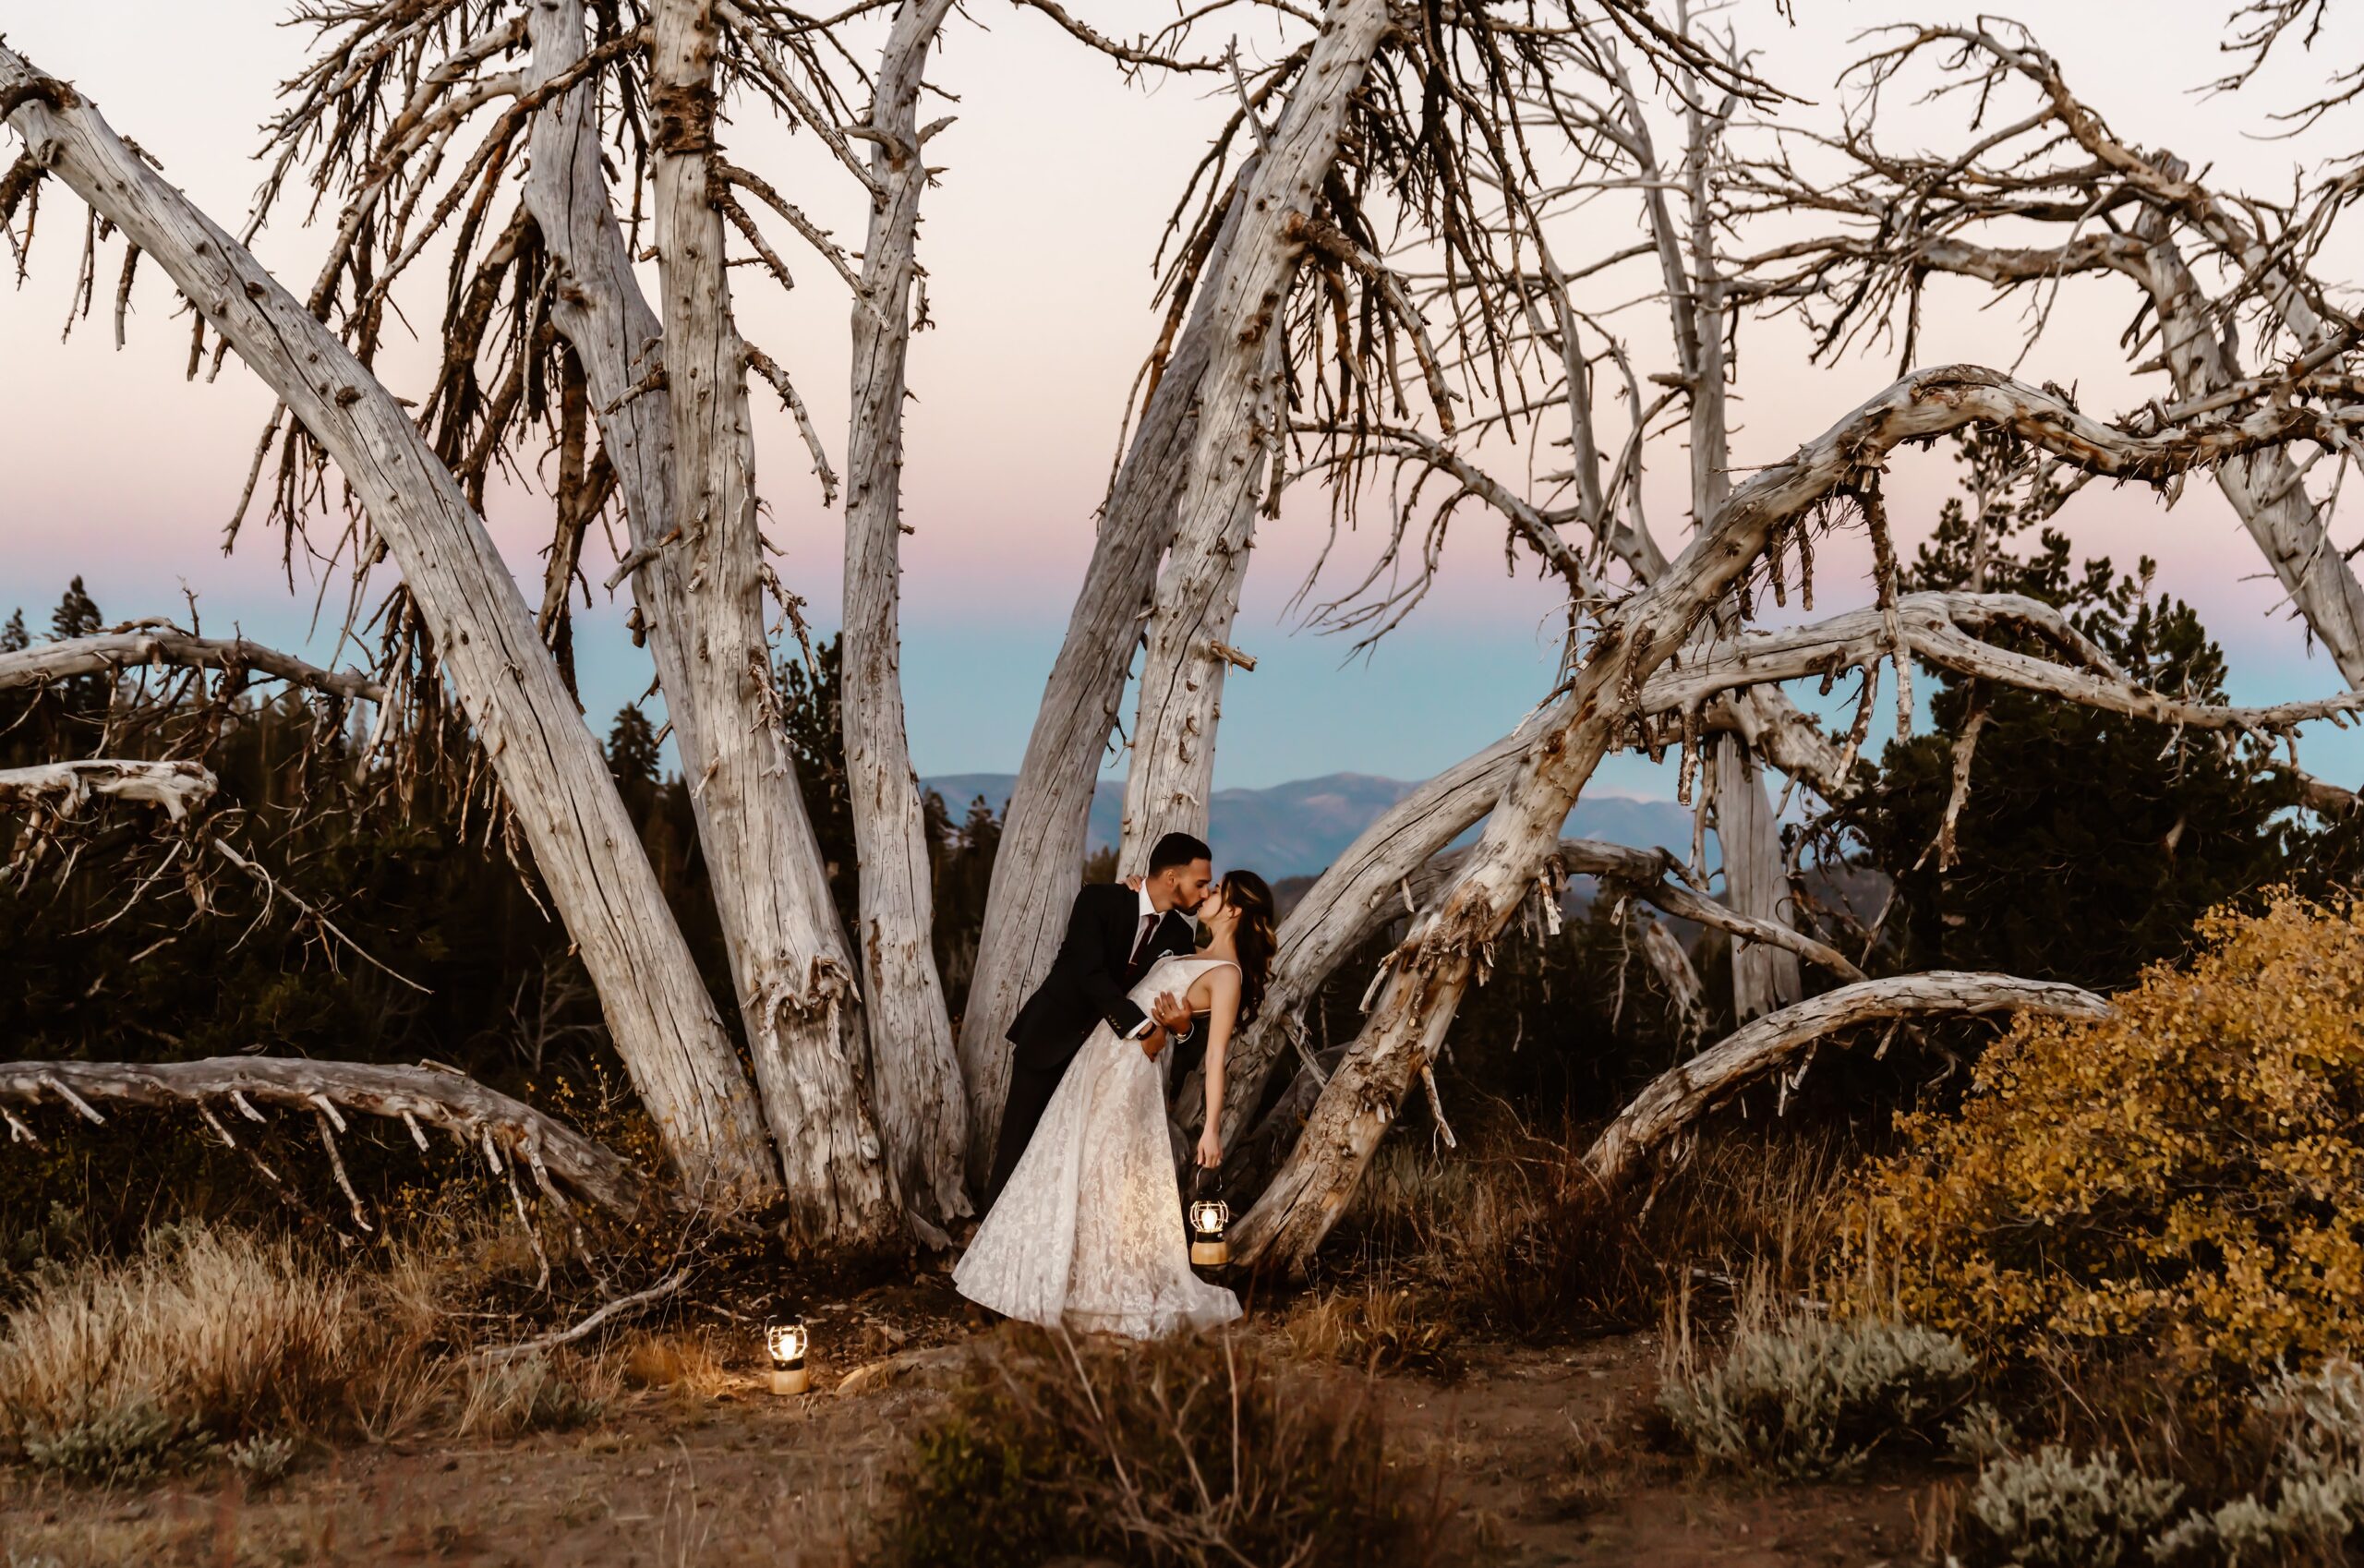 Bride and groom kiss with whimsical tree in the background